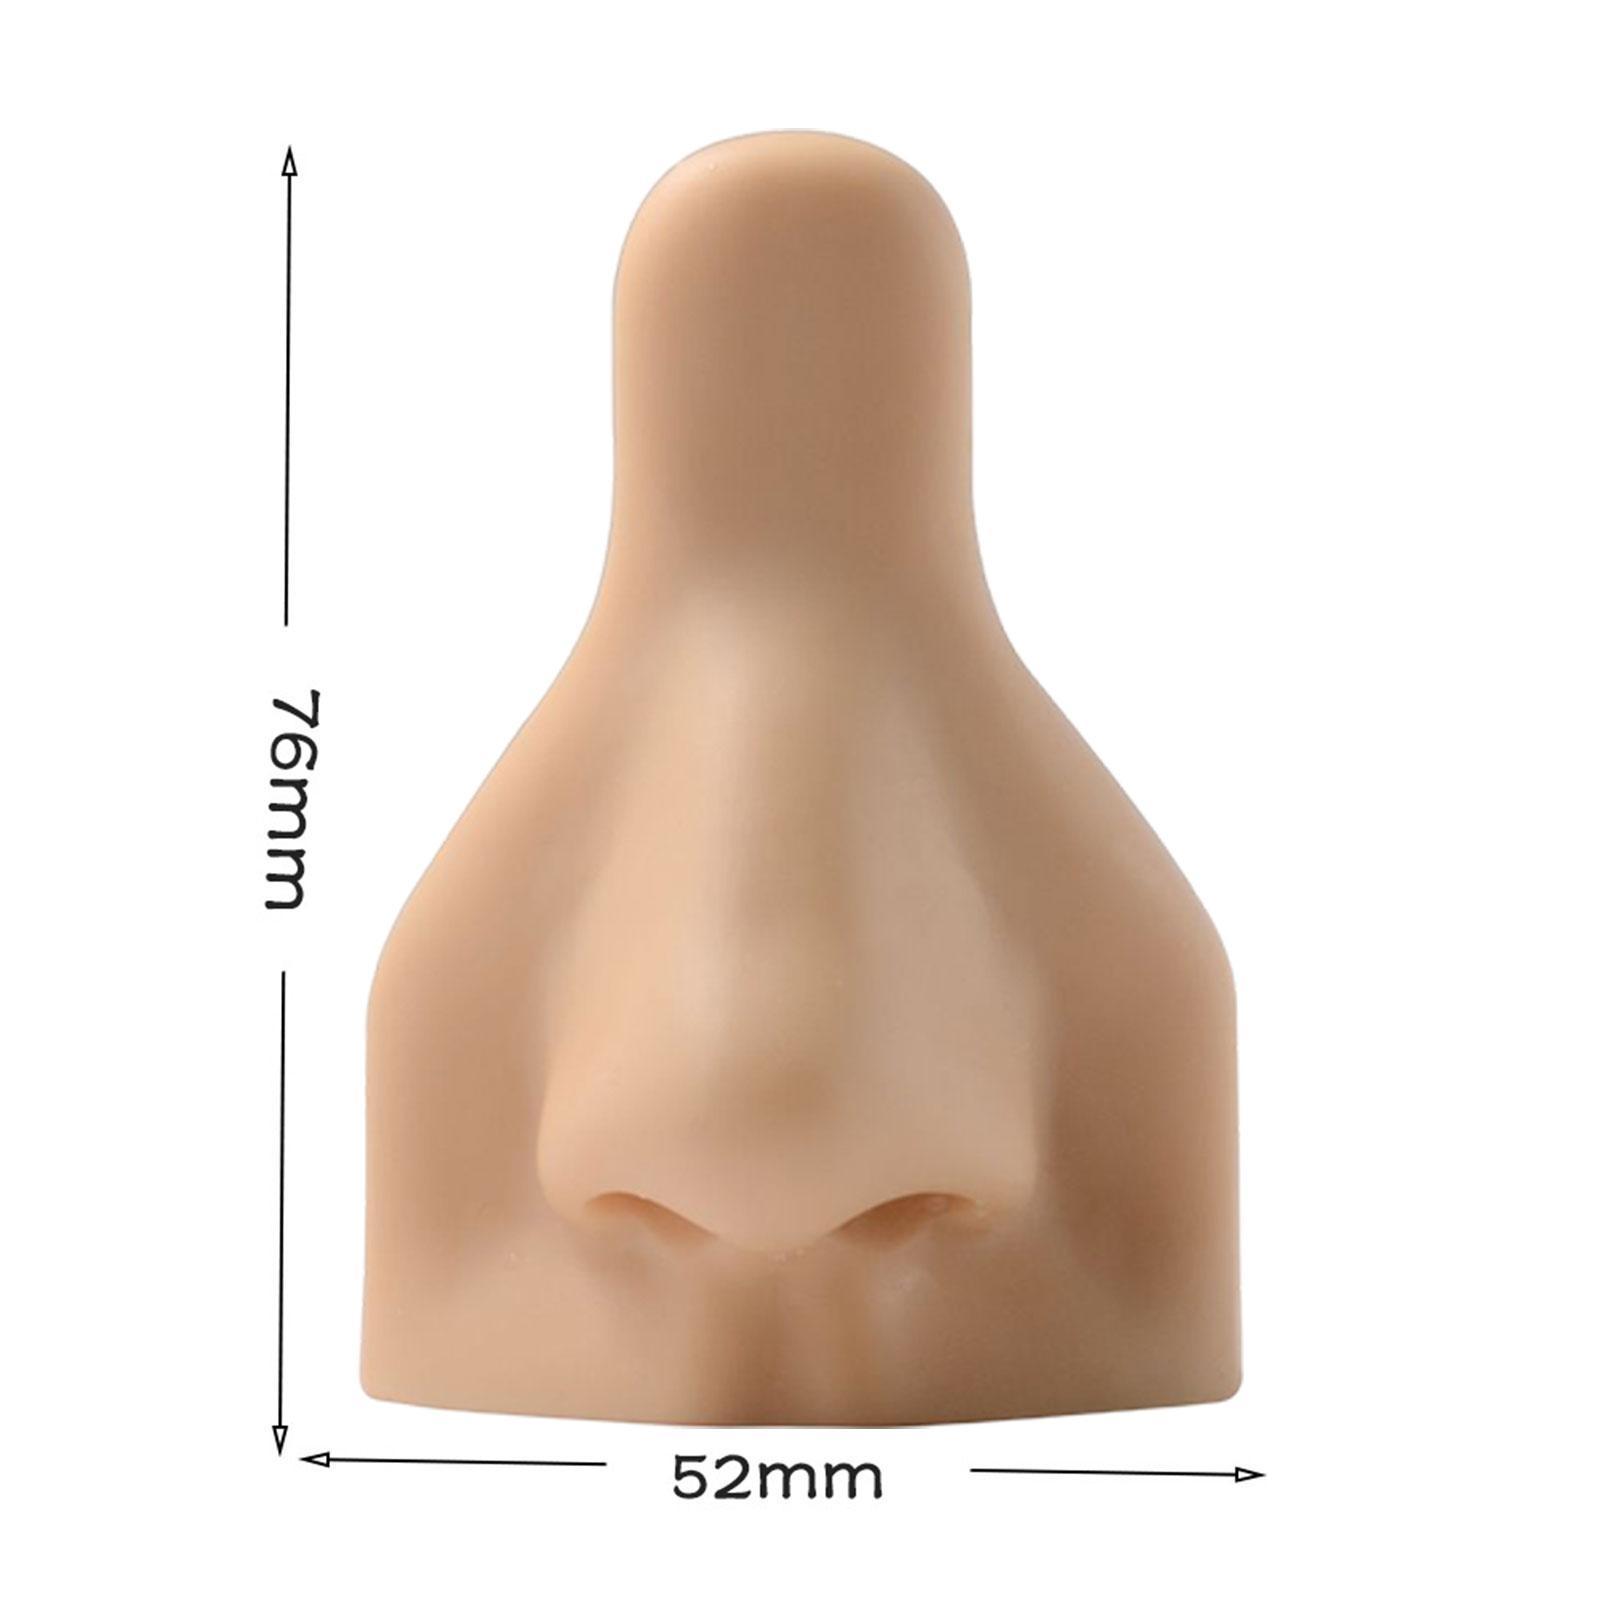 Silicone Nose Model Flexible Body Display Props for Practice Teaching Instructions